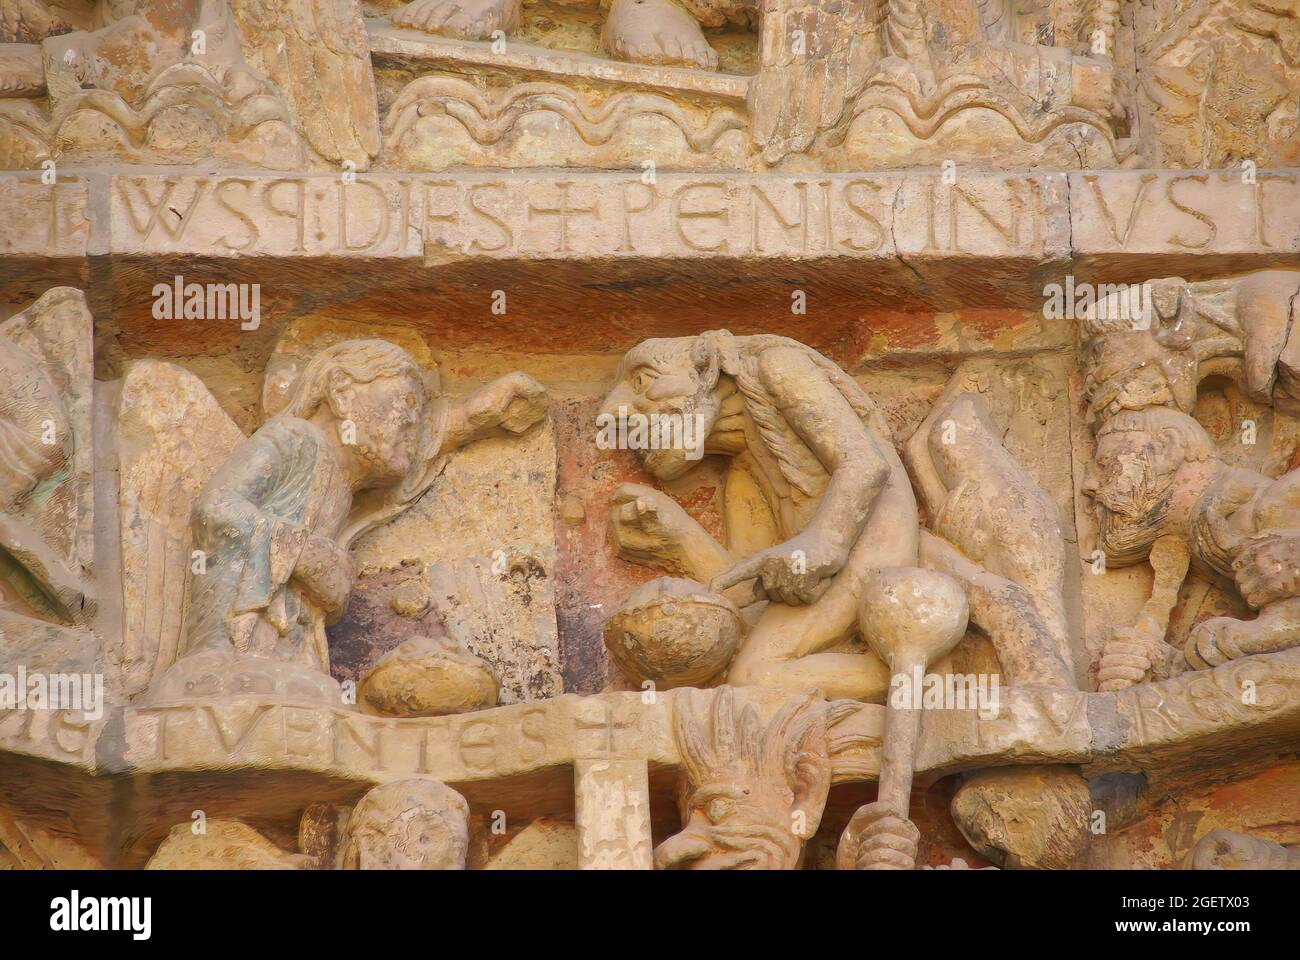 Last Judgment carving showing tortures and punishments of Hell,  from the 13th century, Abbey Church of St. Foy, Conques, France Stock Photo